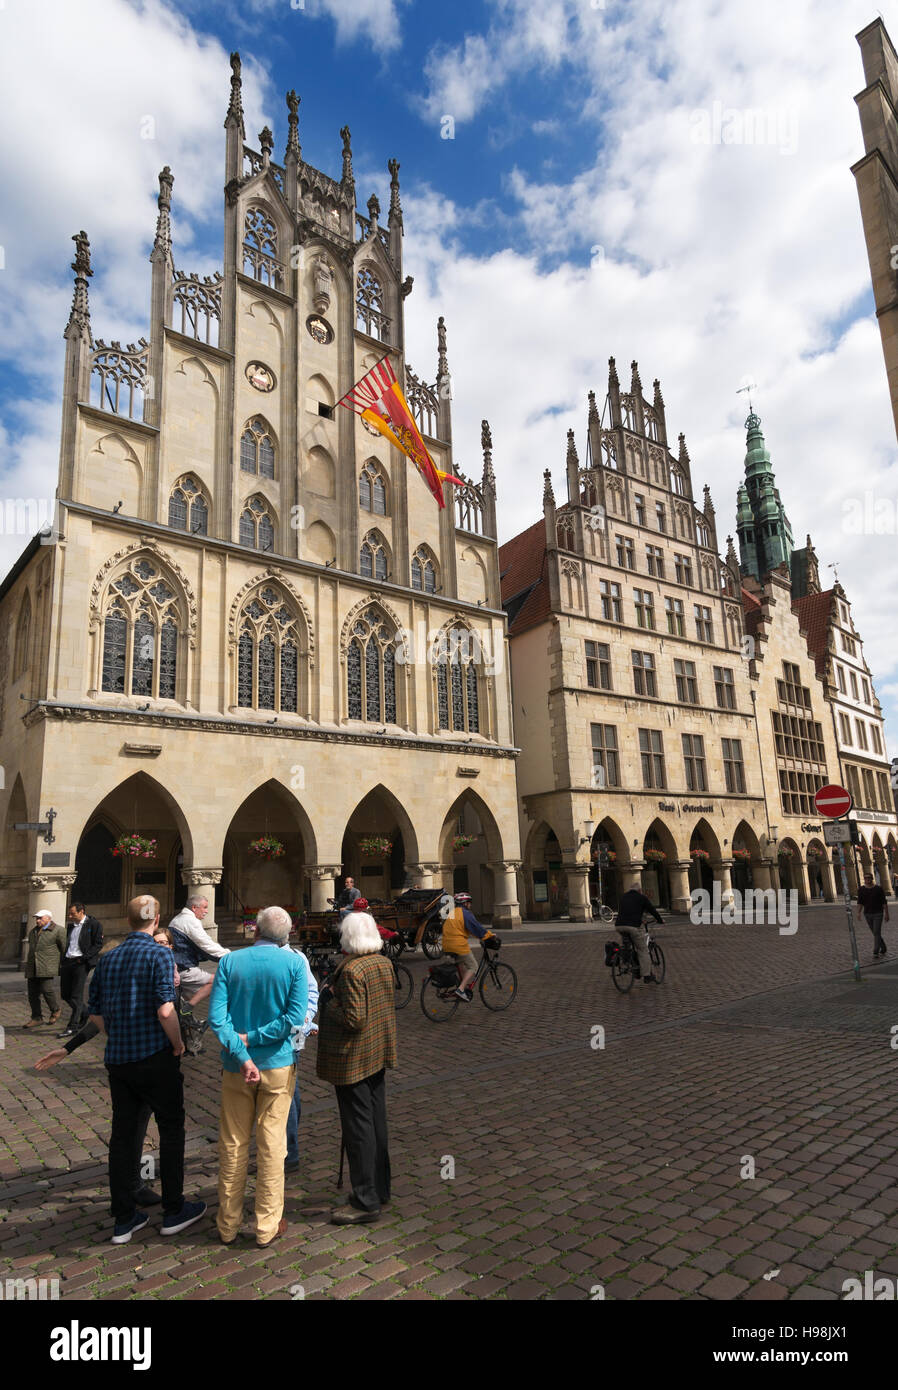 A group of people in the street before the town hall or  Rathaus in Munster, Germany, Europe Stock Photo